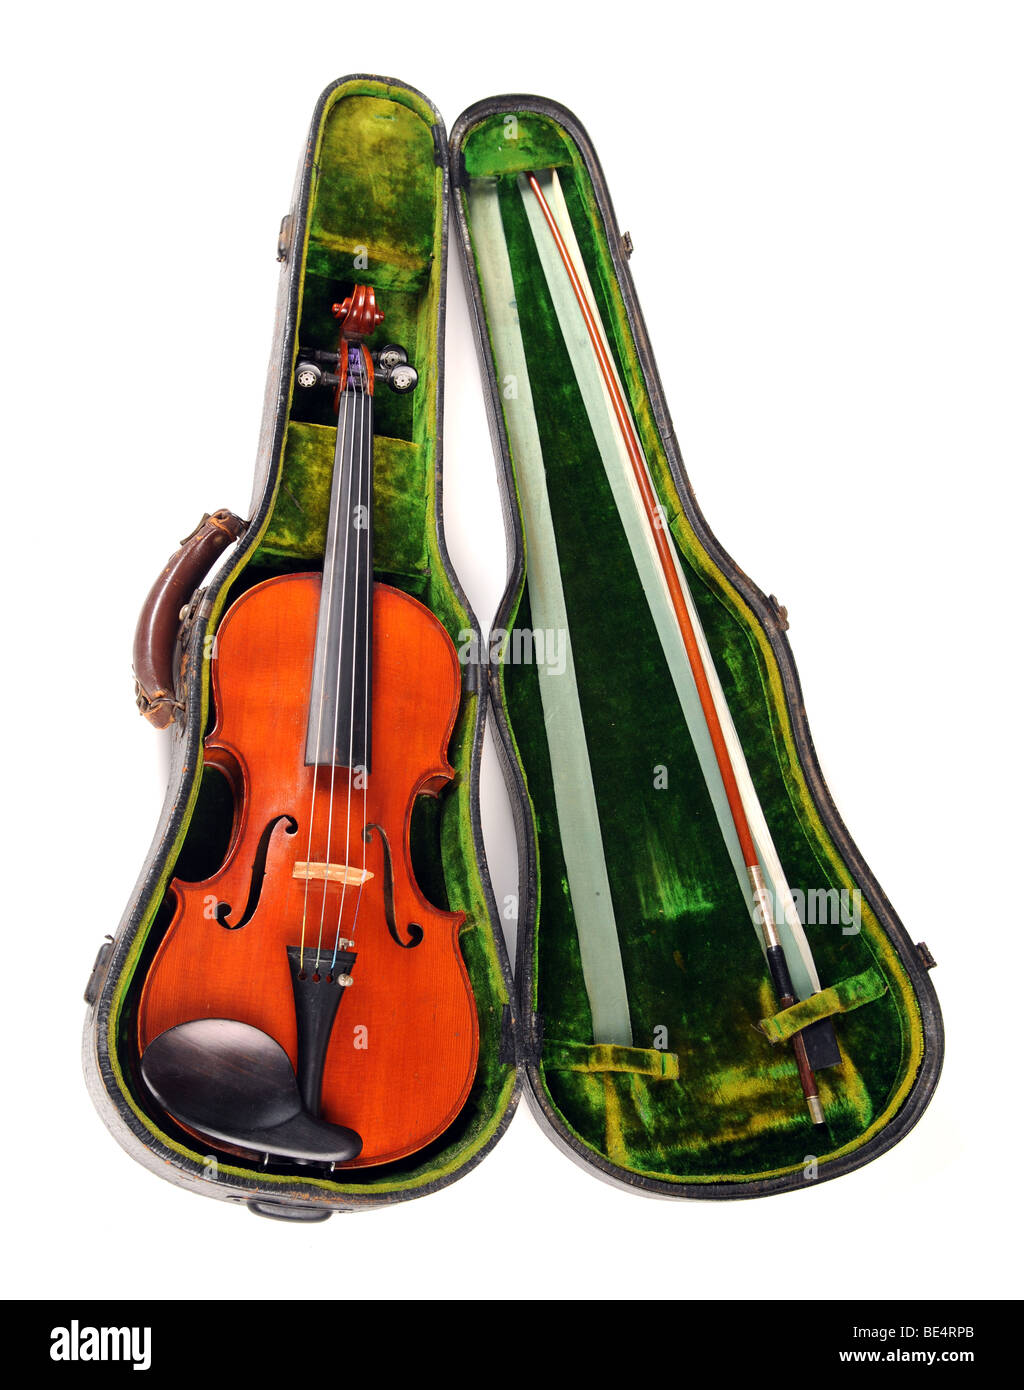 Antique violin in its case isolated over white background Stock Photo